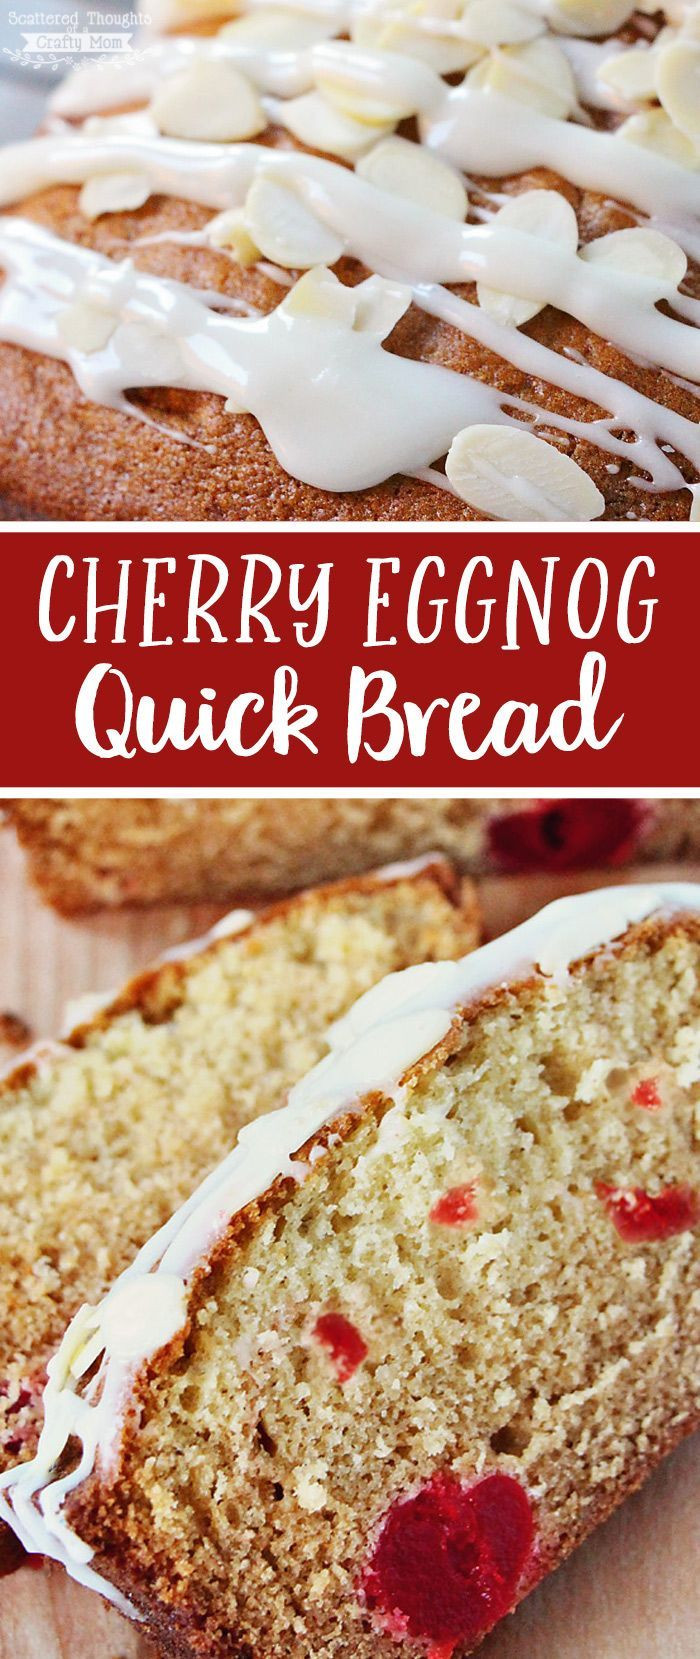 Christmas Quick Bread Recipes
 17 Best images about Christmas Desserts on Pinterest